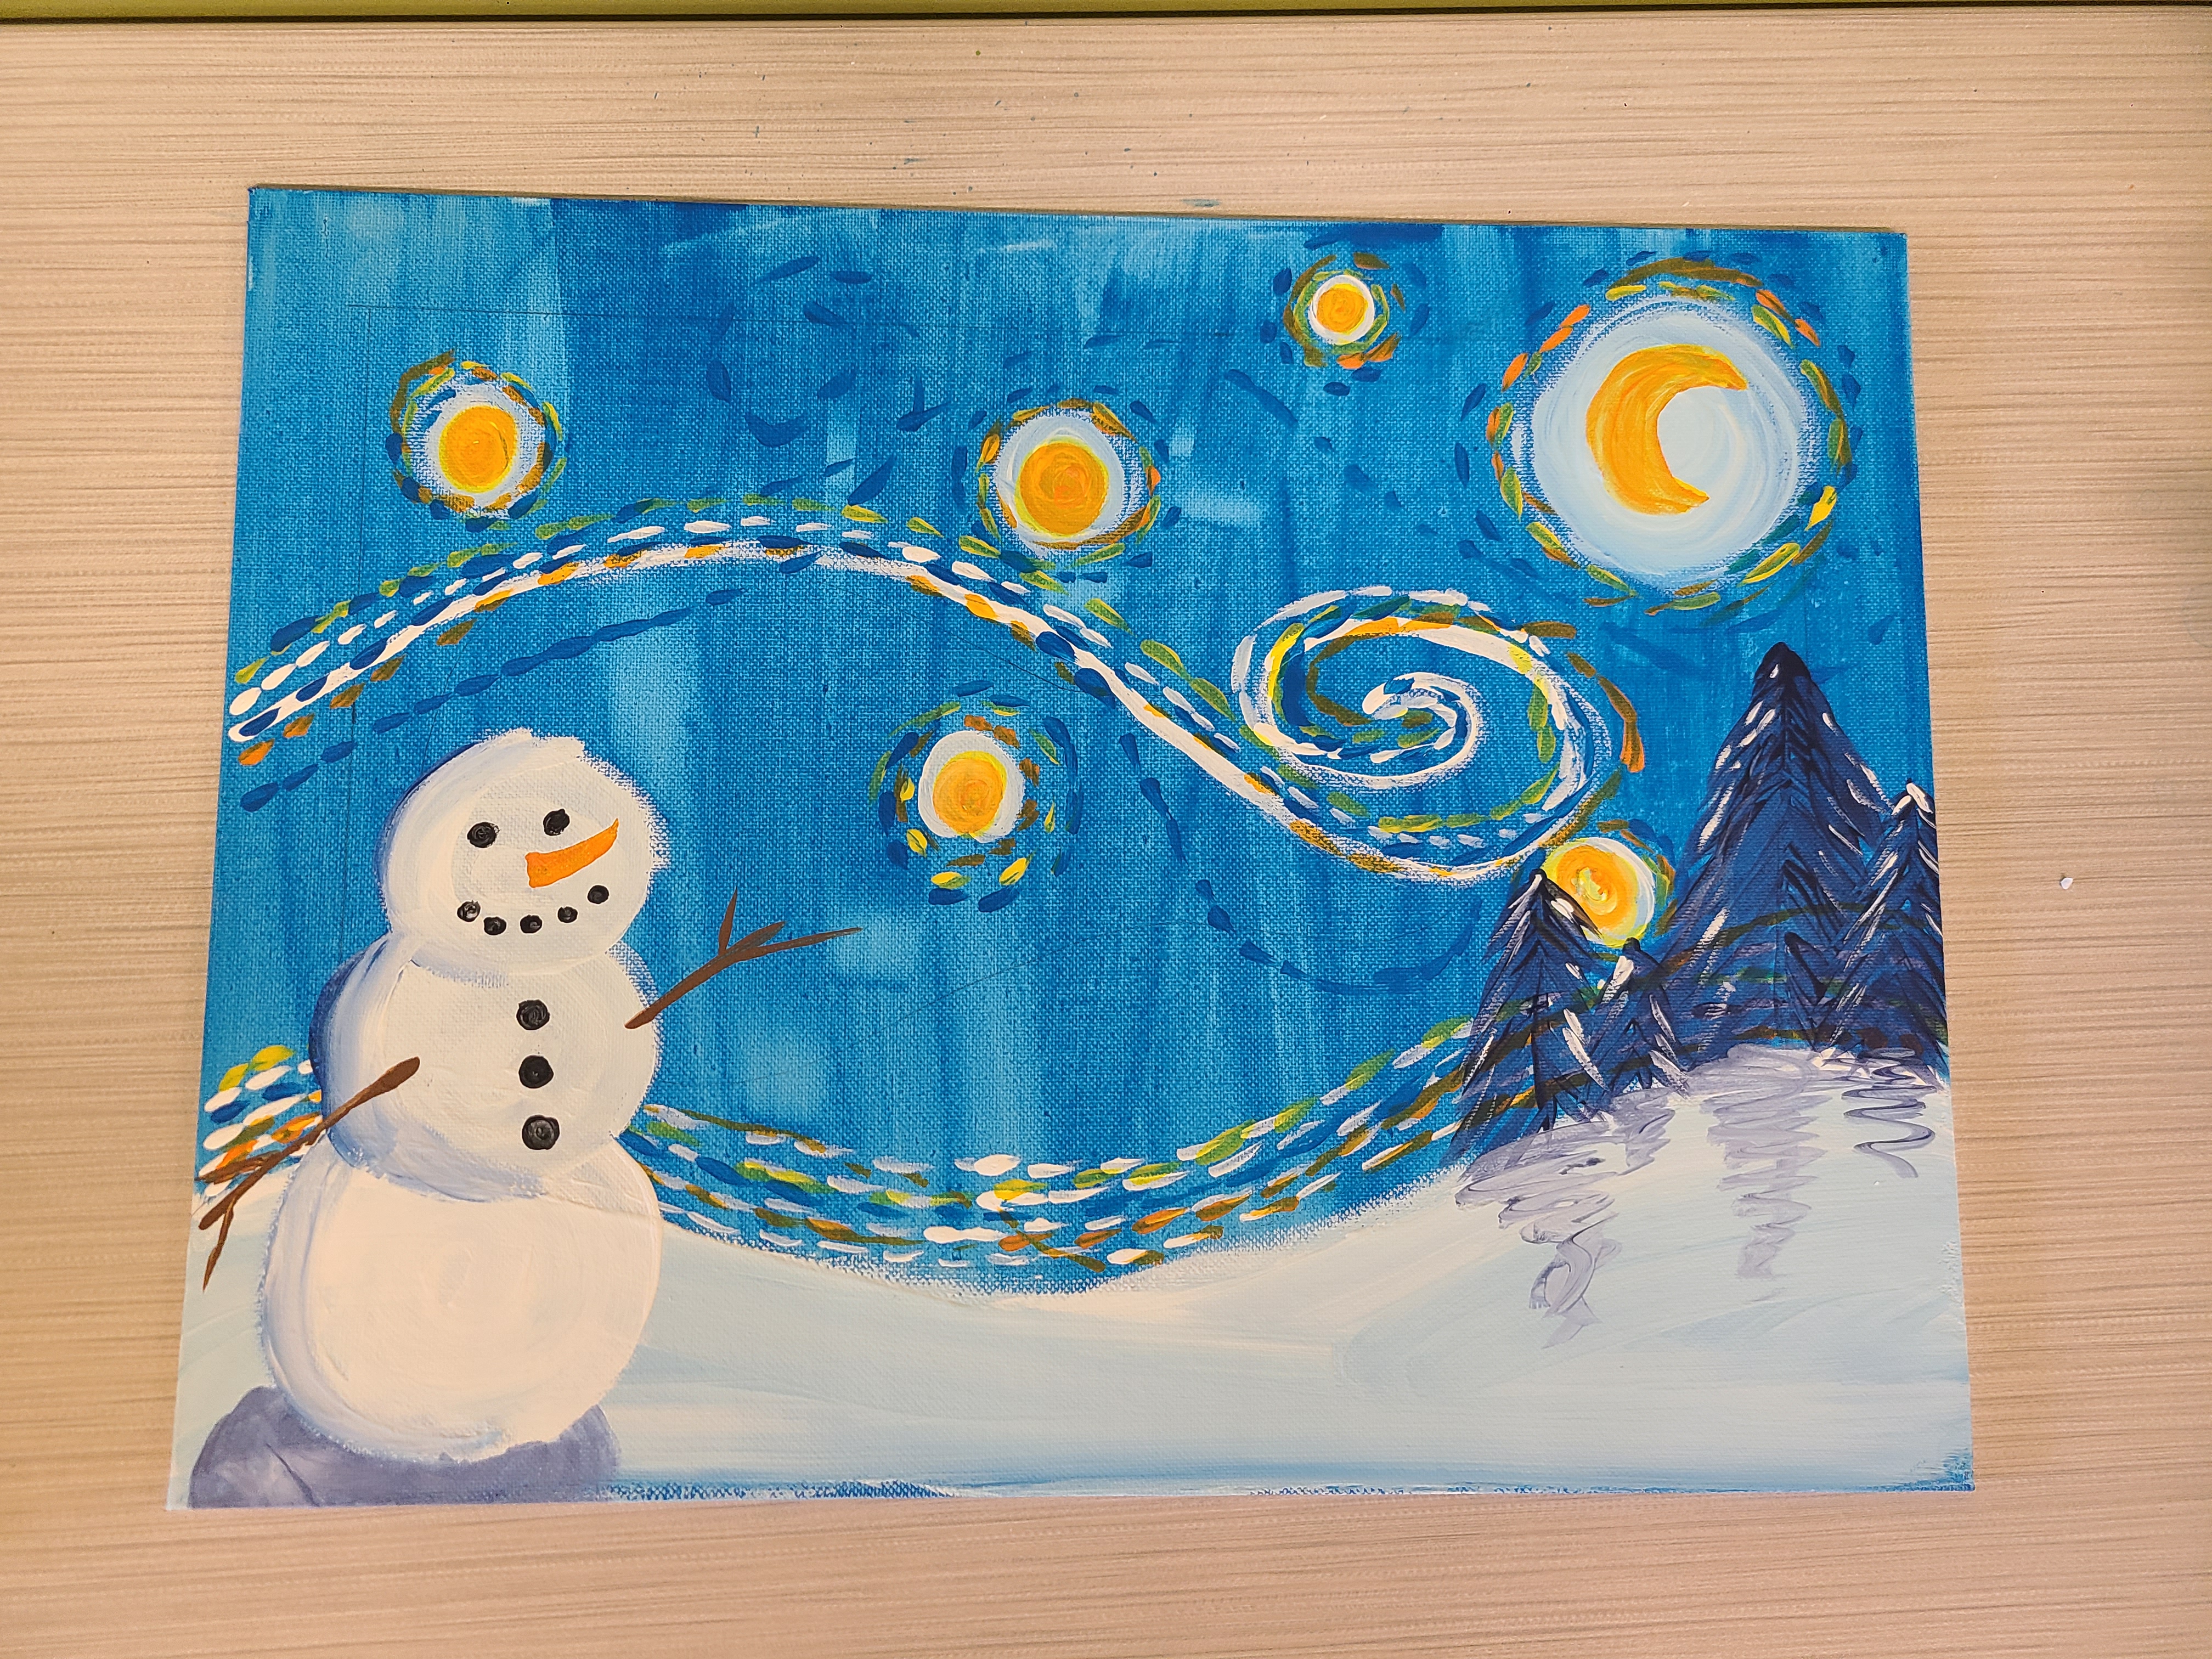 Snowman with a blue starry night background